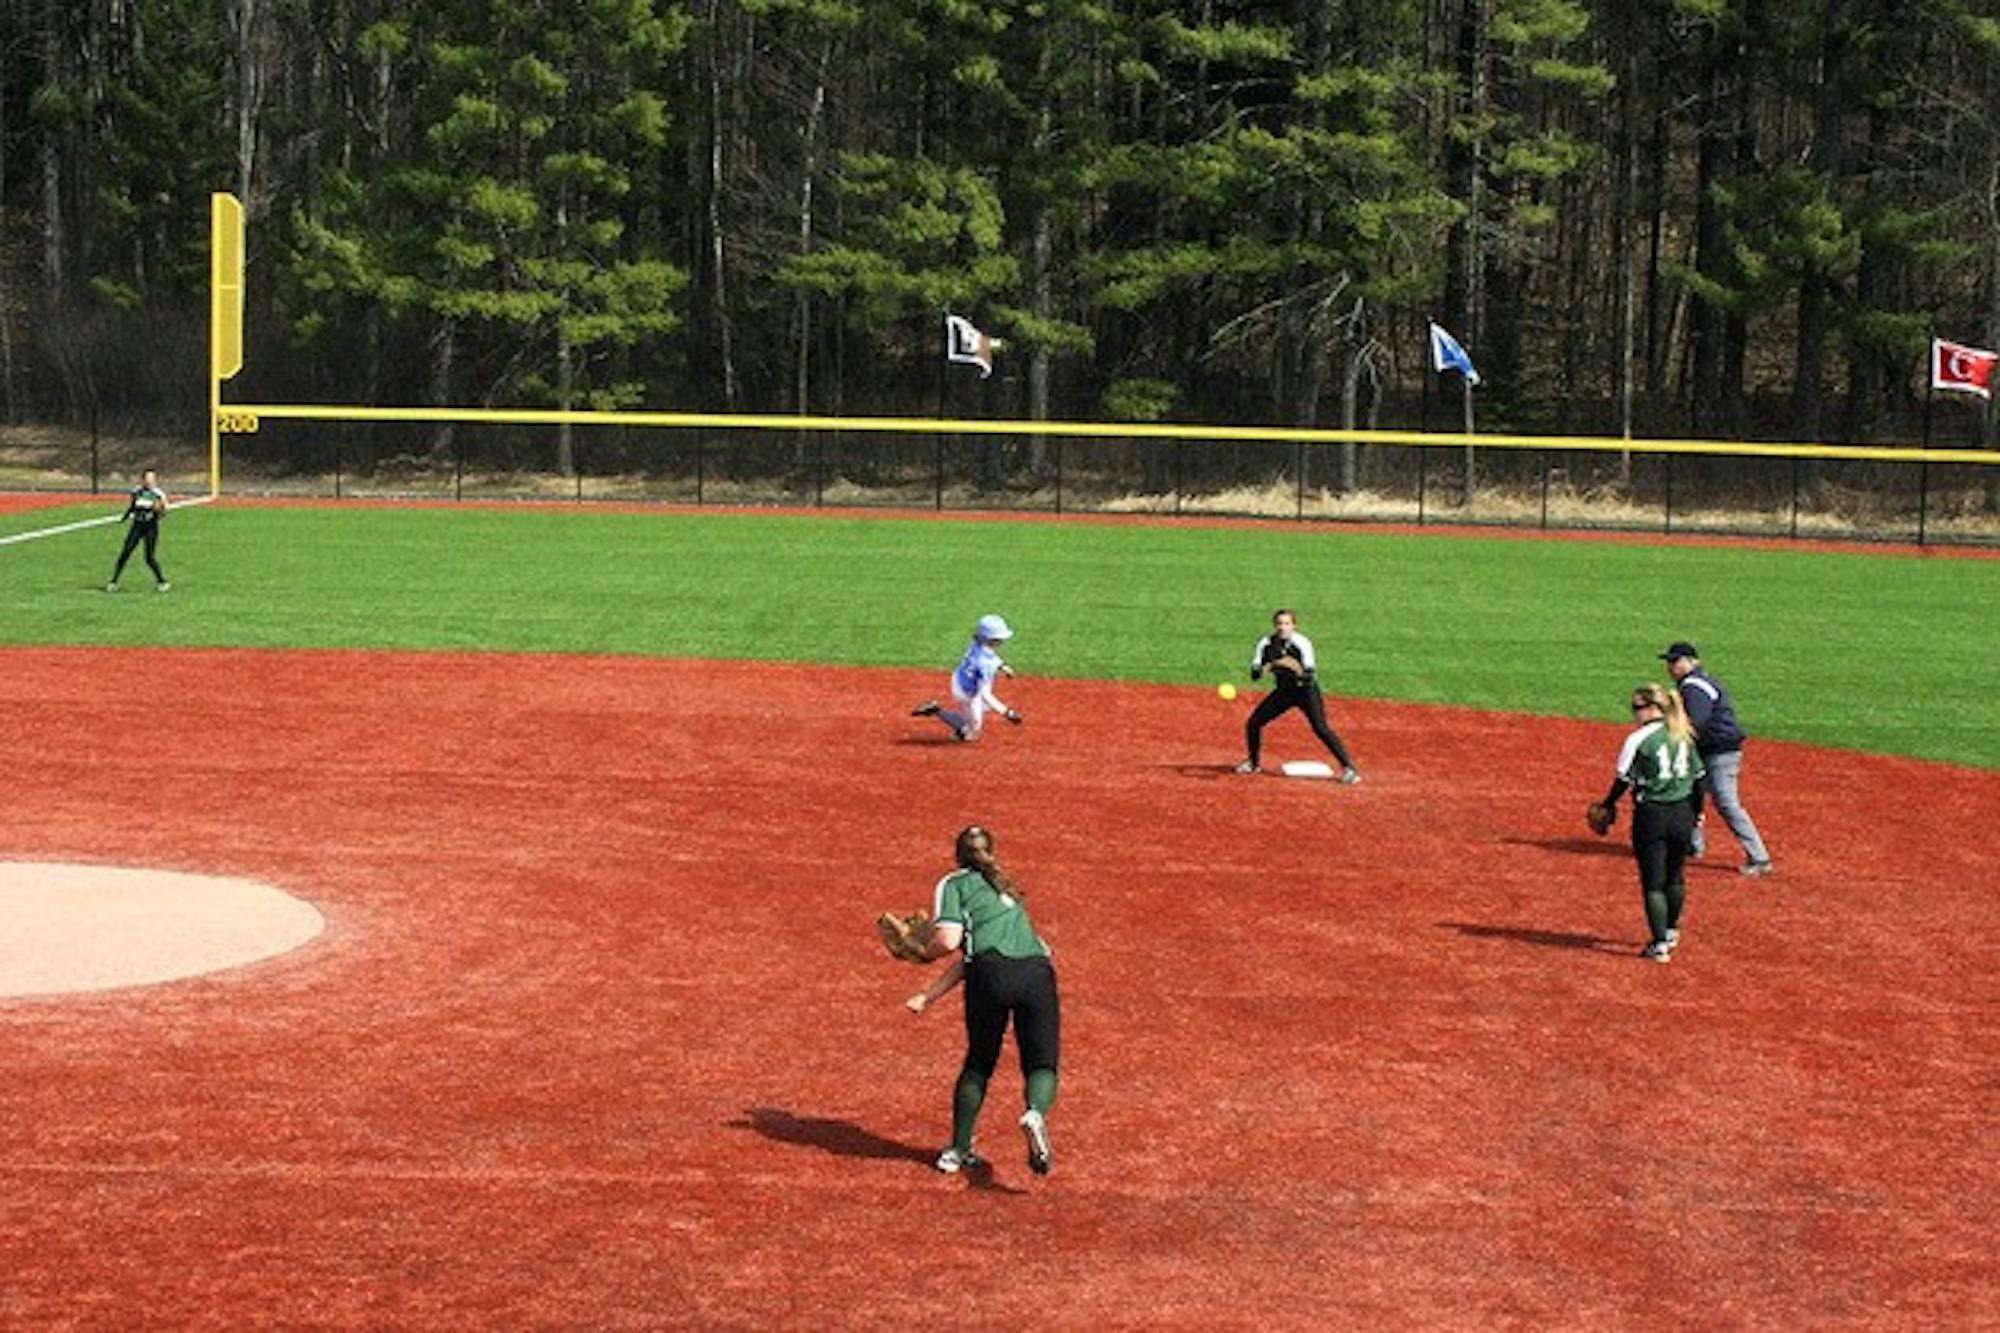 The softball team managed only four total hits during its doubleheader against the State University of New York at Albany, dropping both games, 4-0.